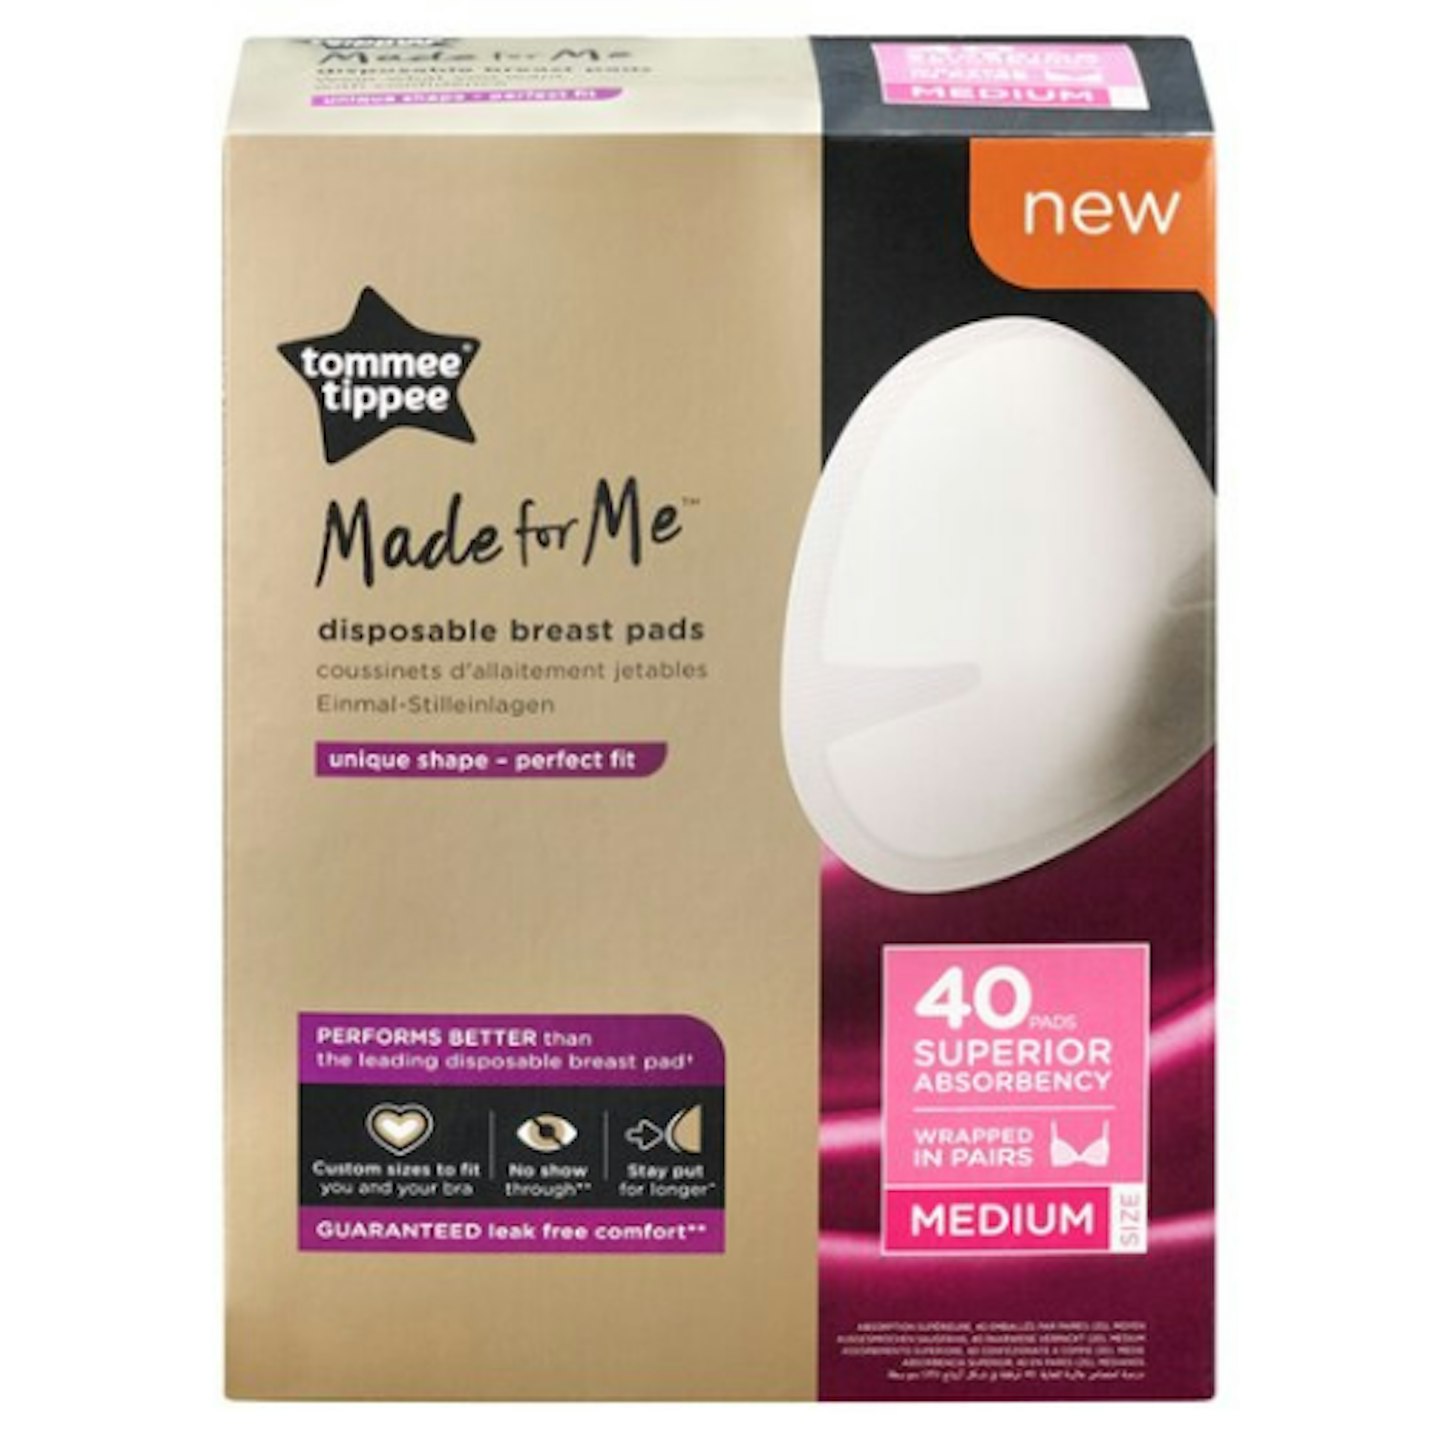 https://images.bauerhosting.com/affiliates/sites/12/motherandbaby/legacy/root/tommee-tippee-40-disposable-breast-pads.png?auto=format&w=1440&q=80